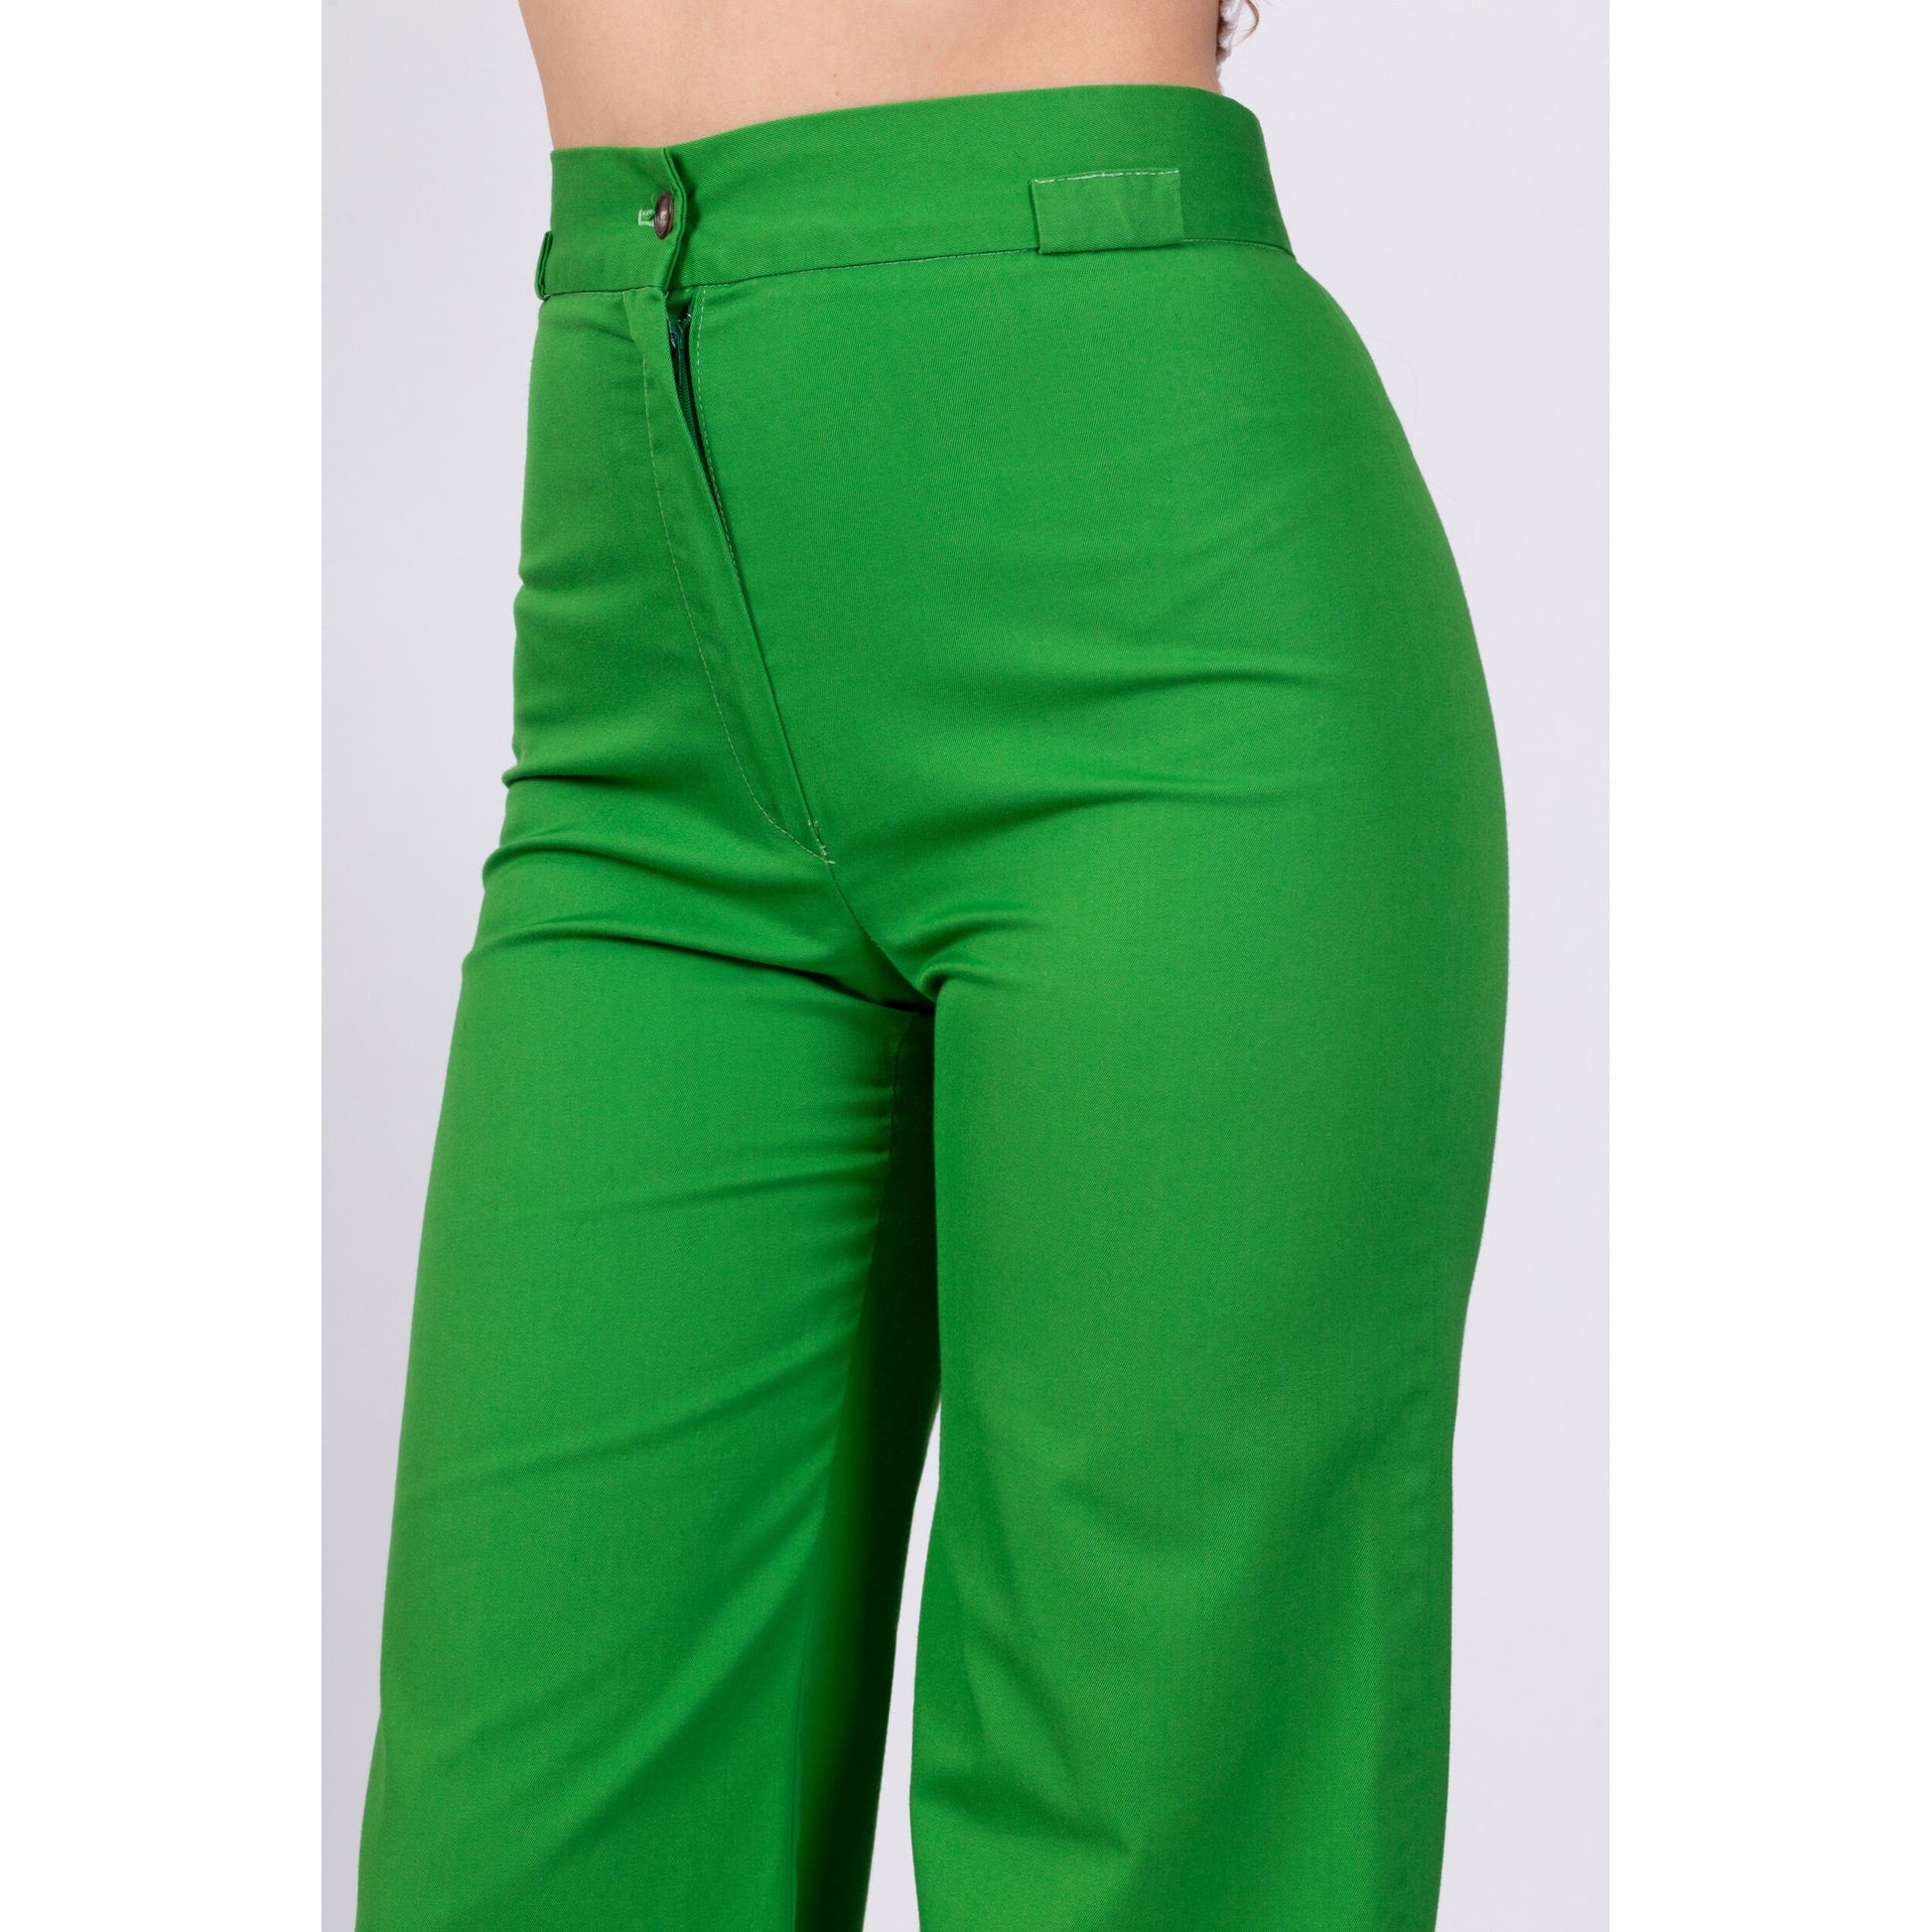 70s Green High Waisted Pants - Small to Medium 